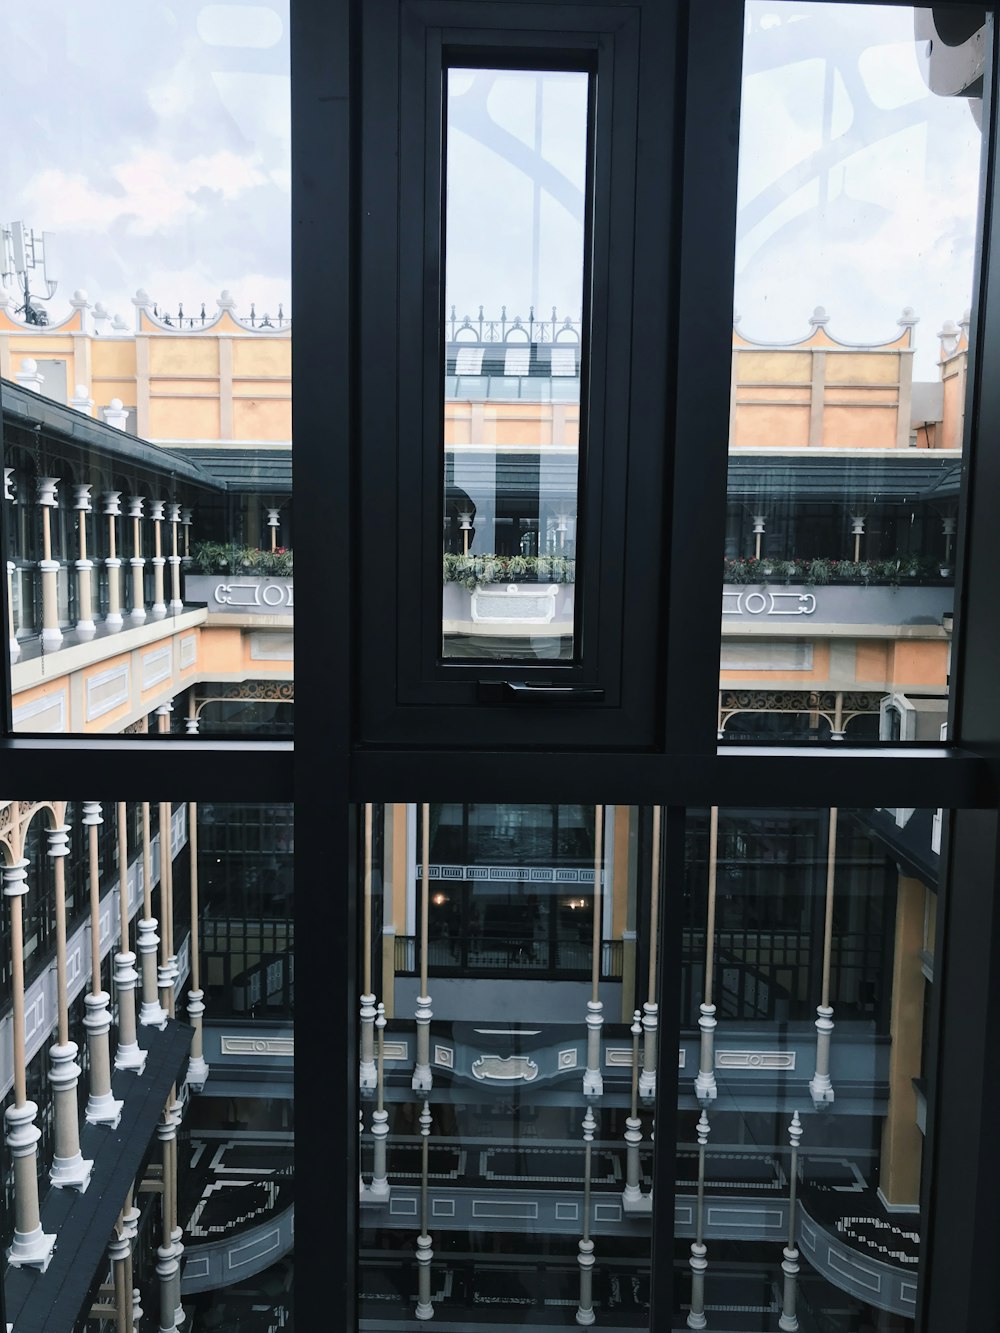 a view of a building through a glass window